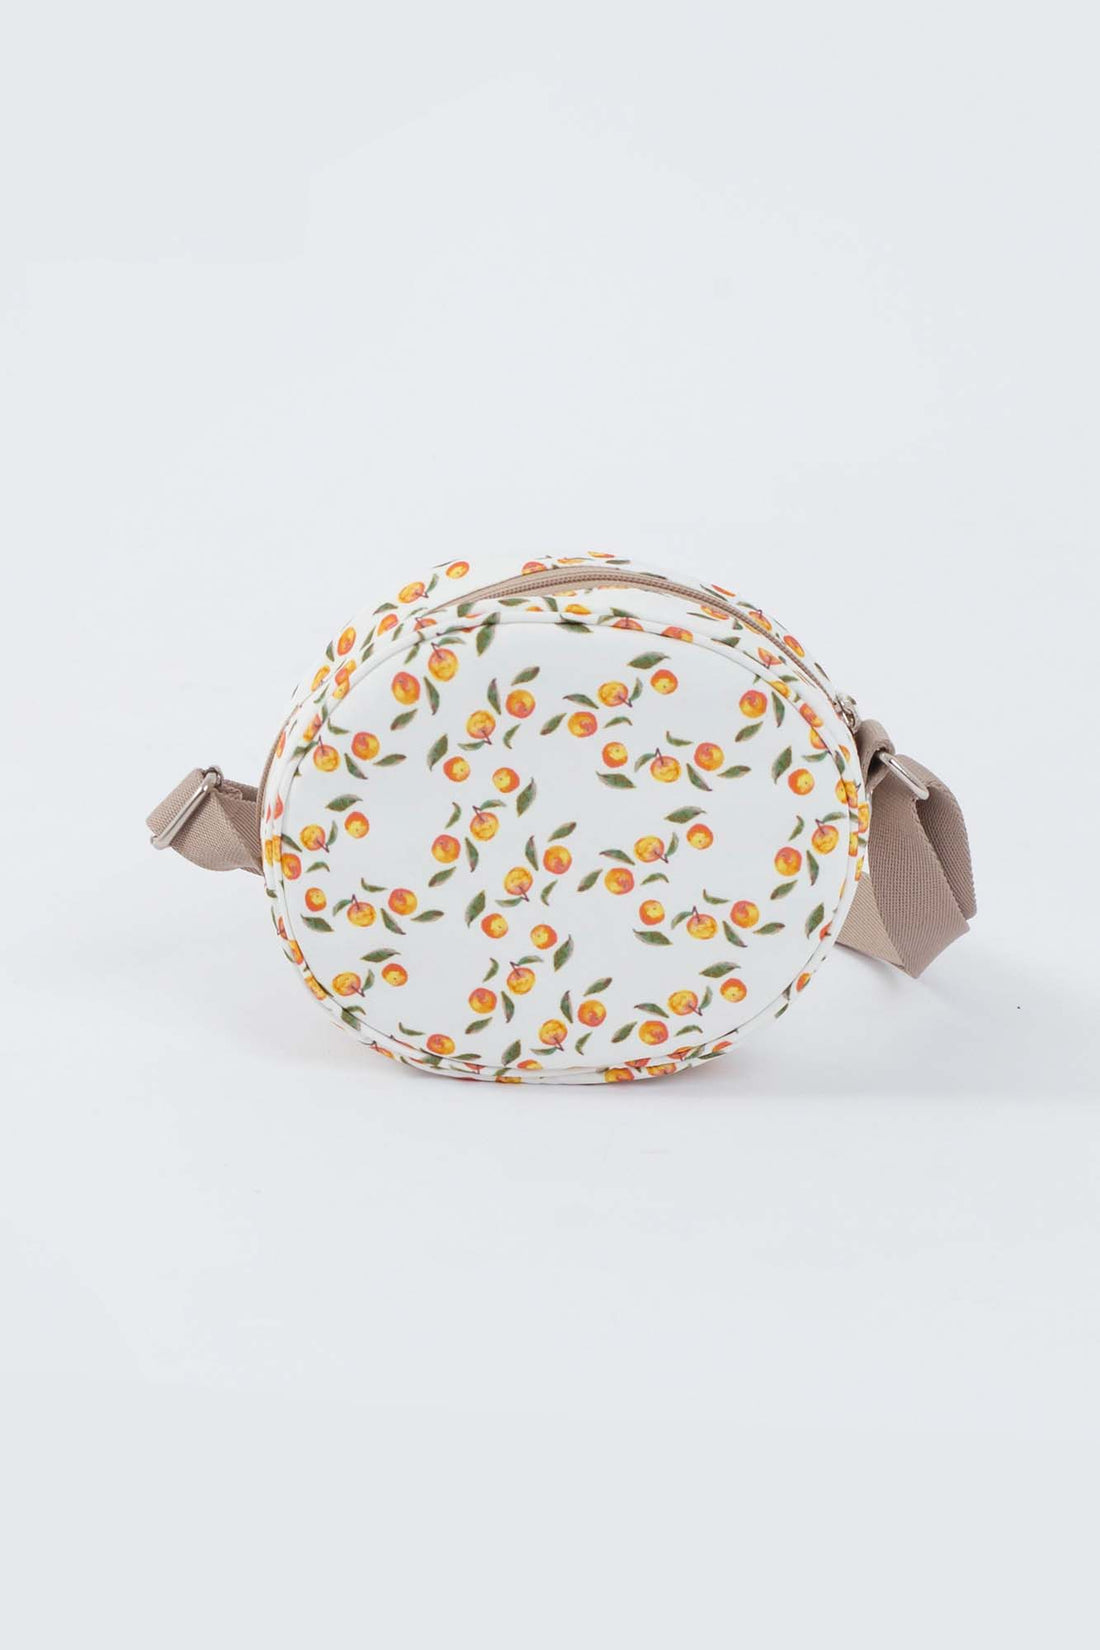 Clementine Oval Bag